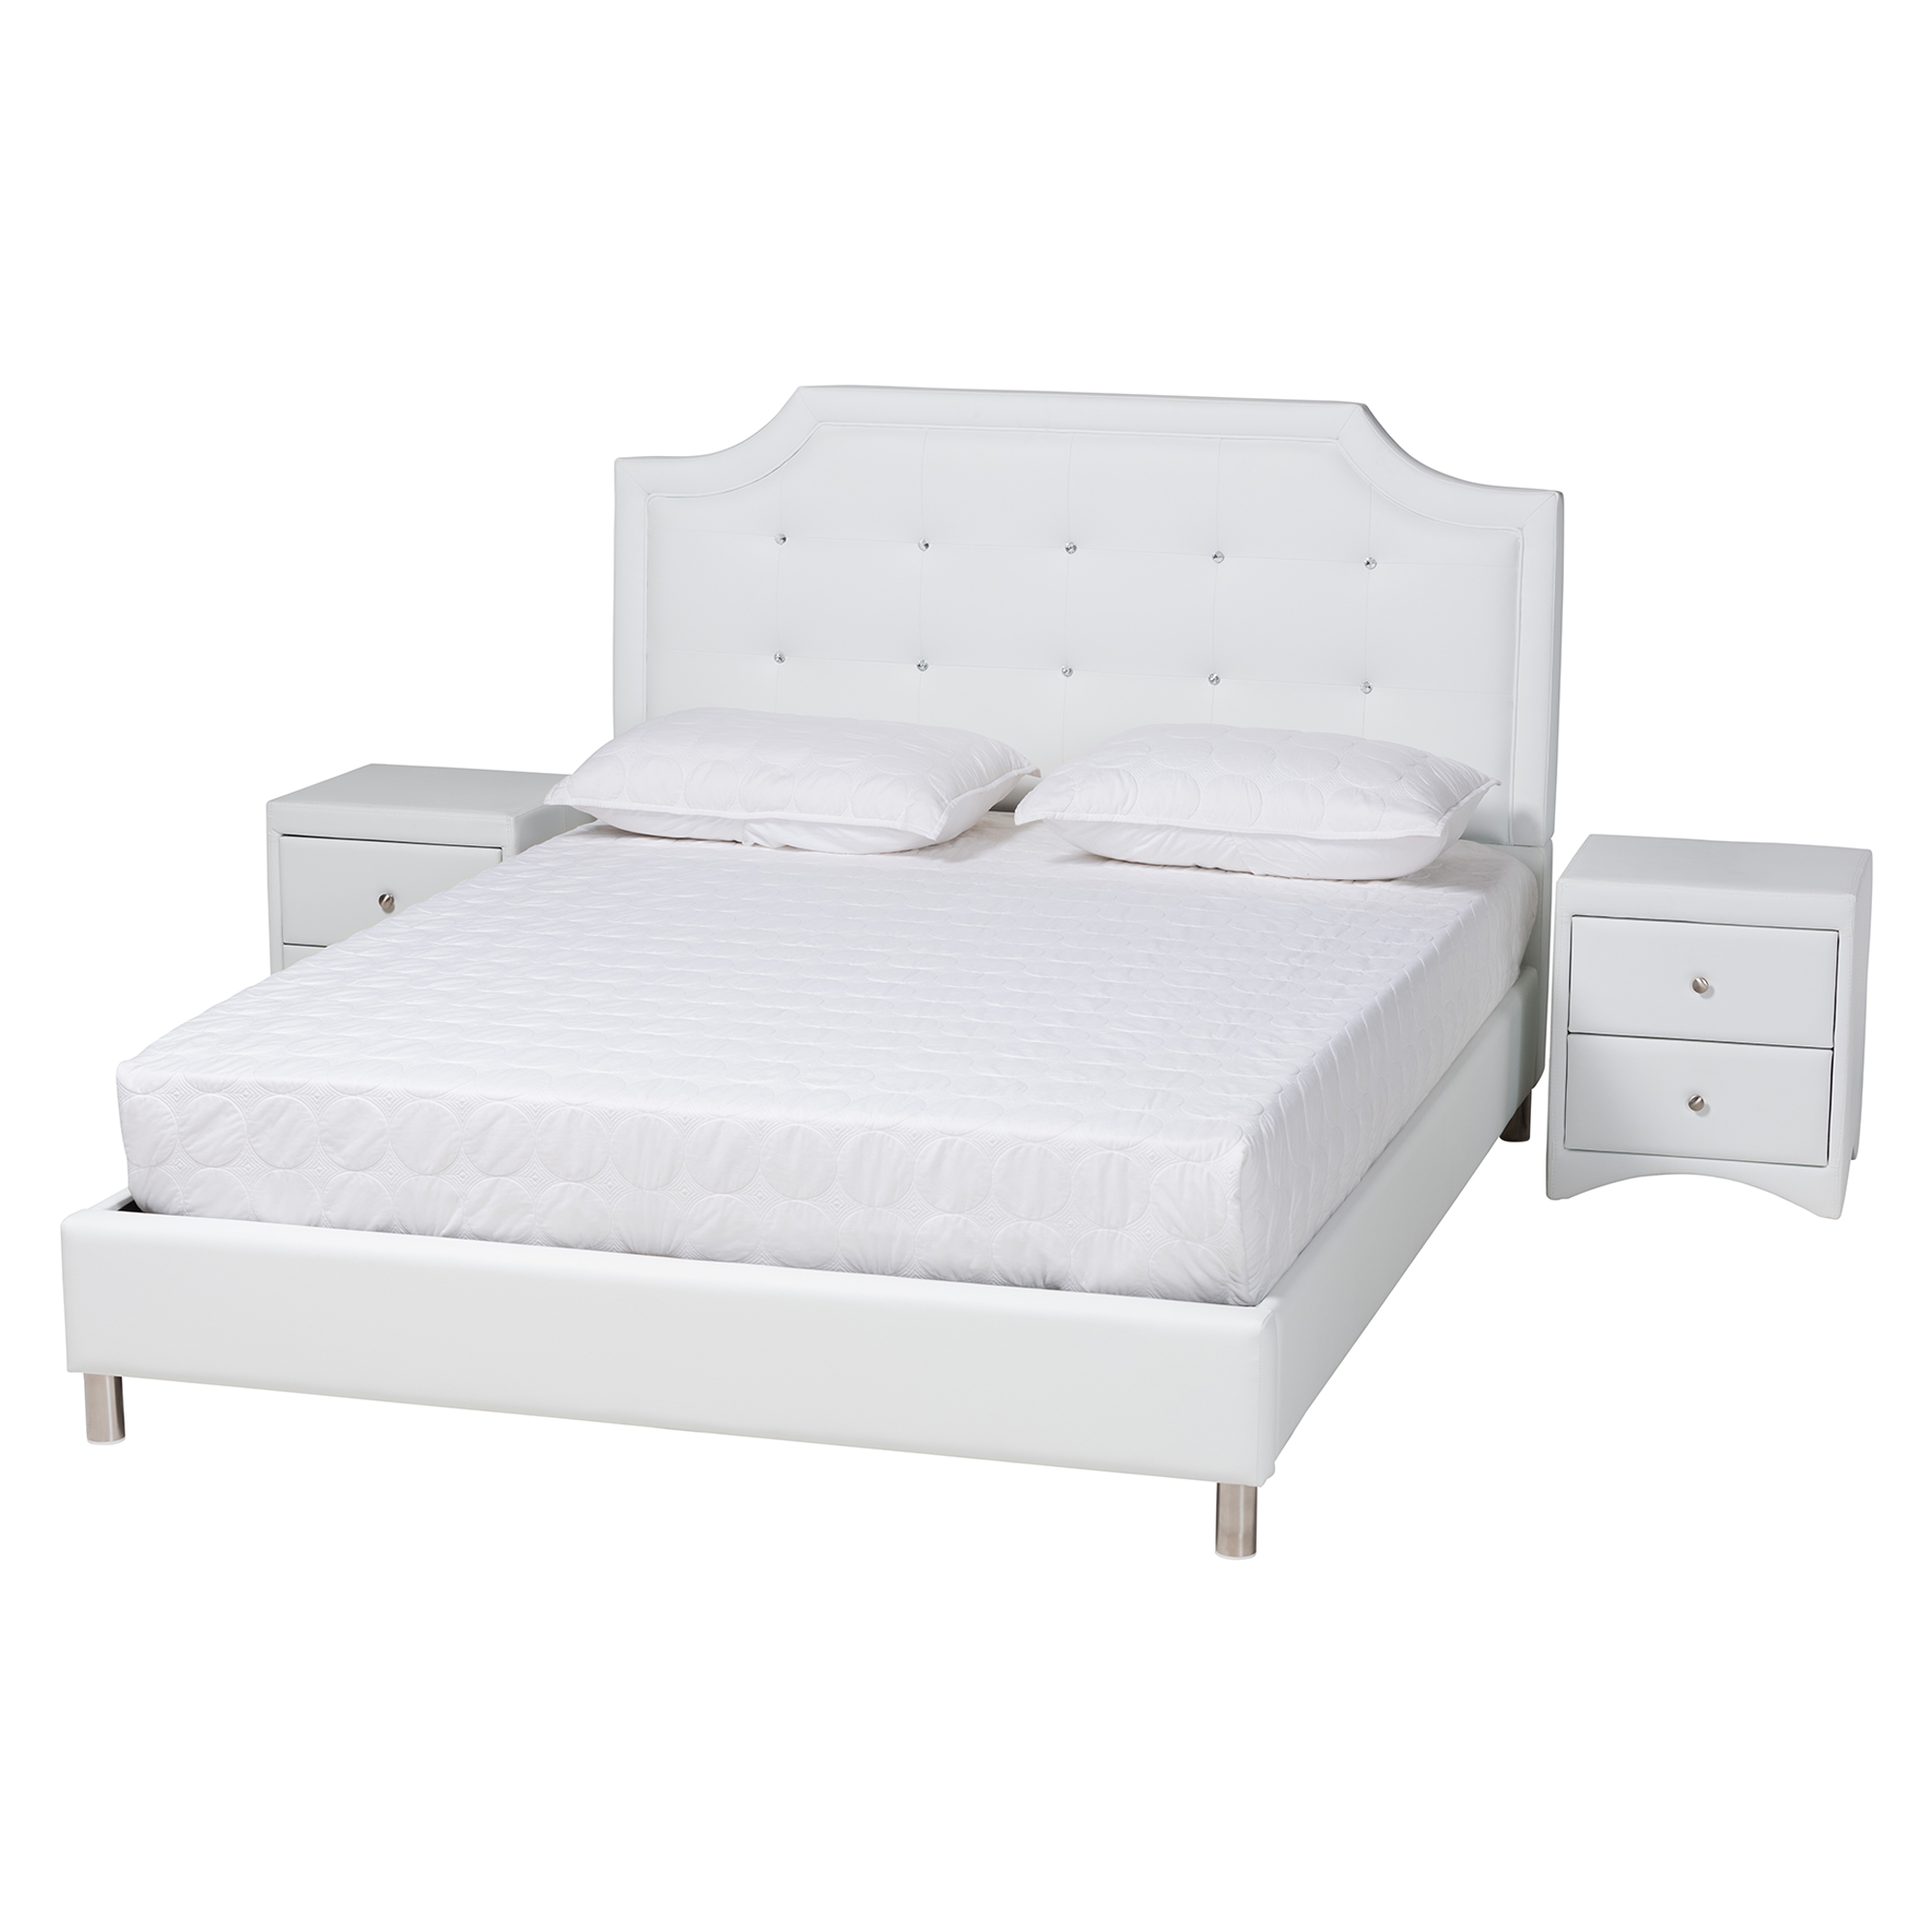 Baxton Studio Carlotta Contemporary Glam White Faux Leather Upholstered King Size 3-Piece Bedroom Set